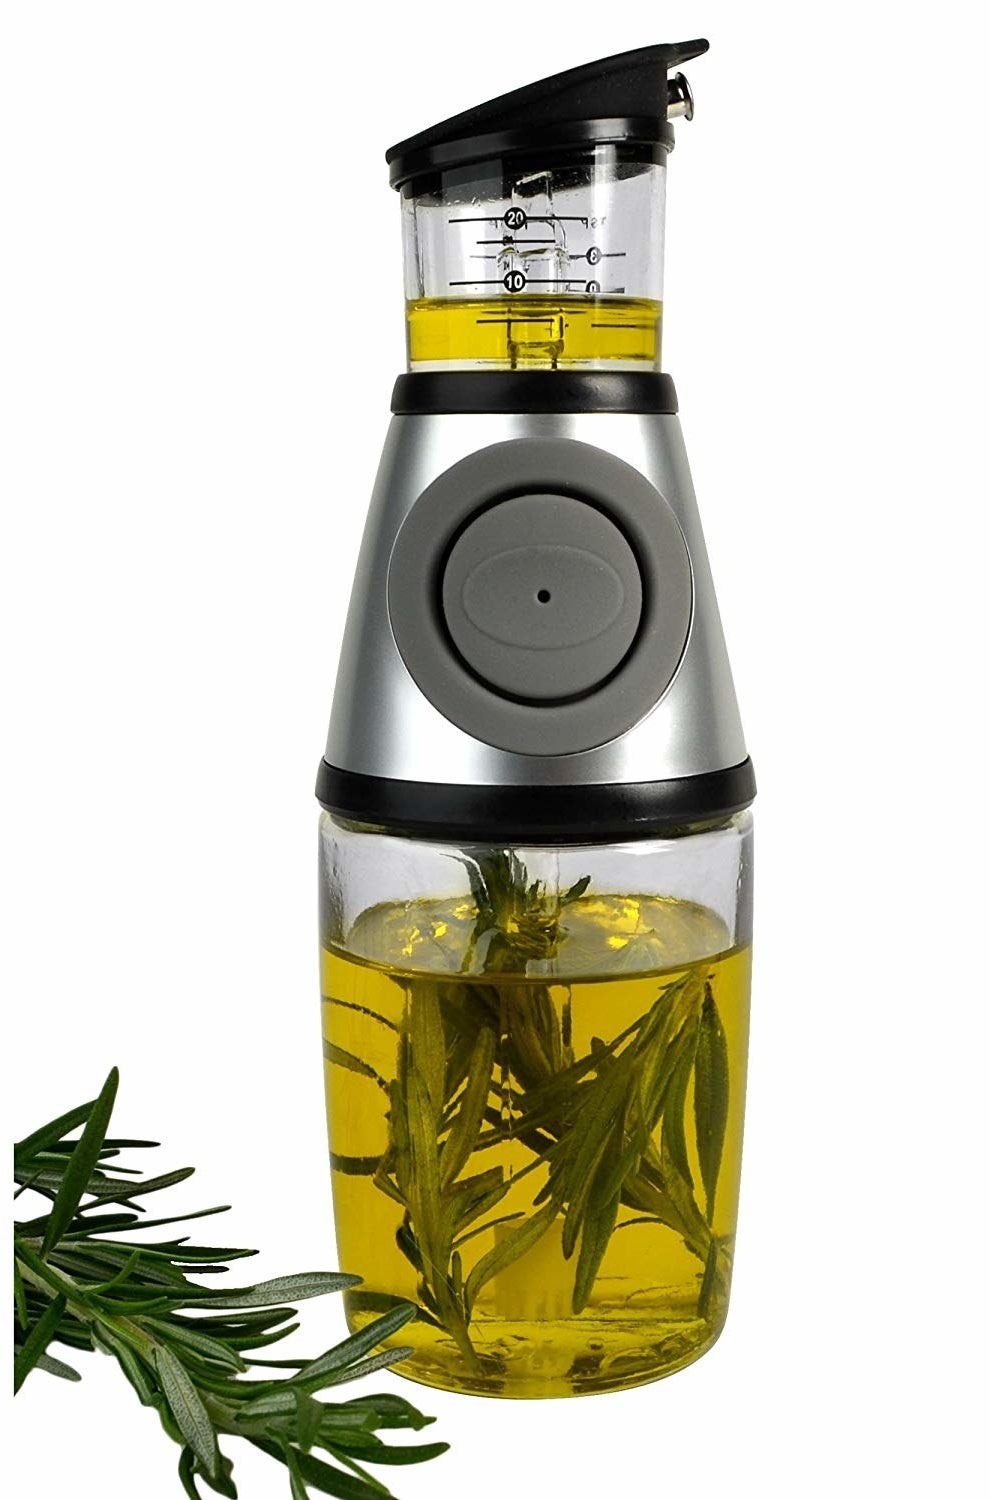 The bottle with rosemary inside